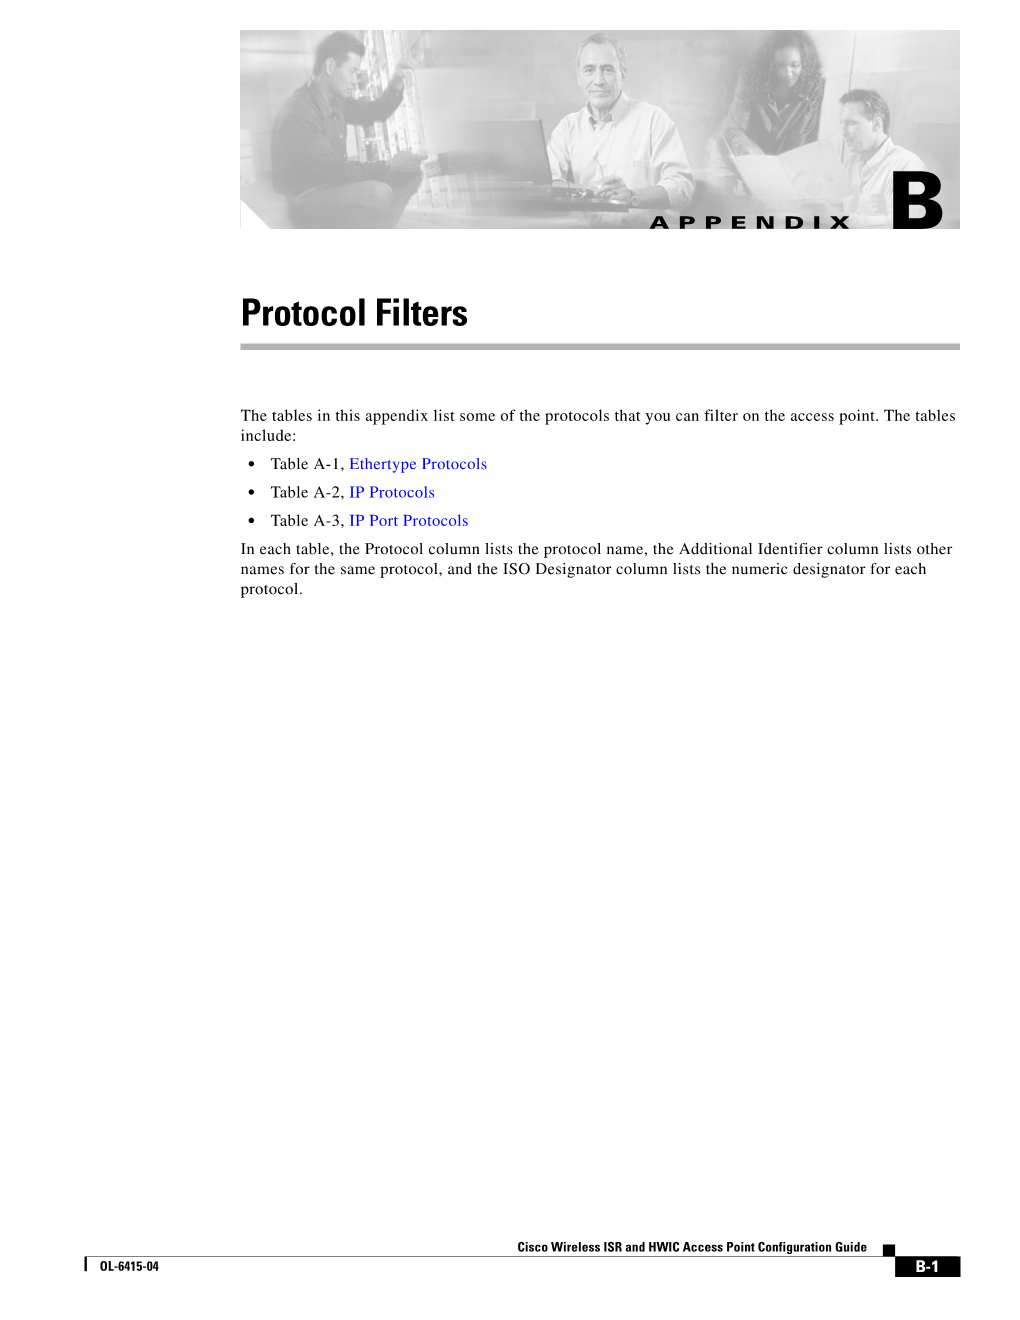 Protocol Filters